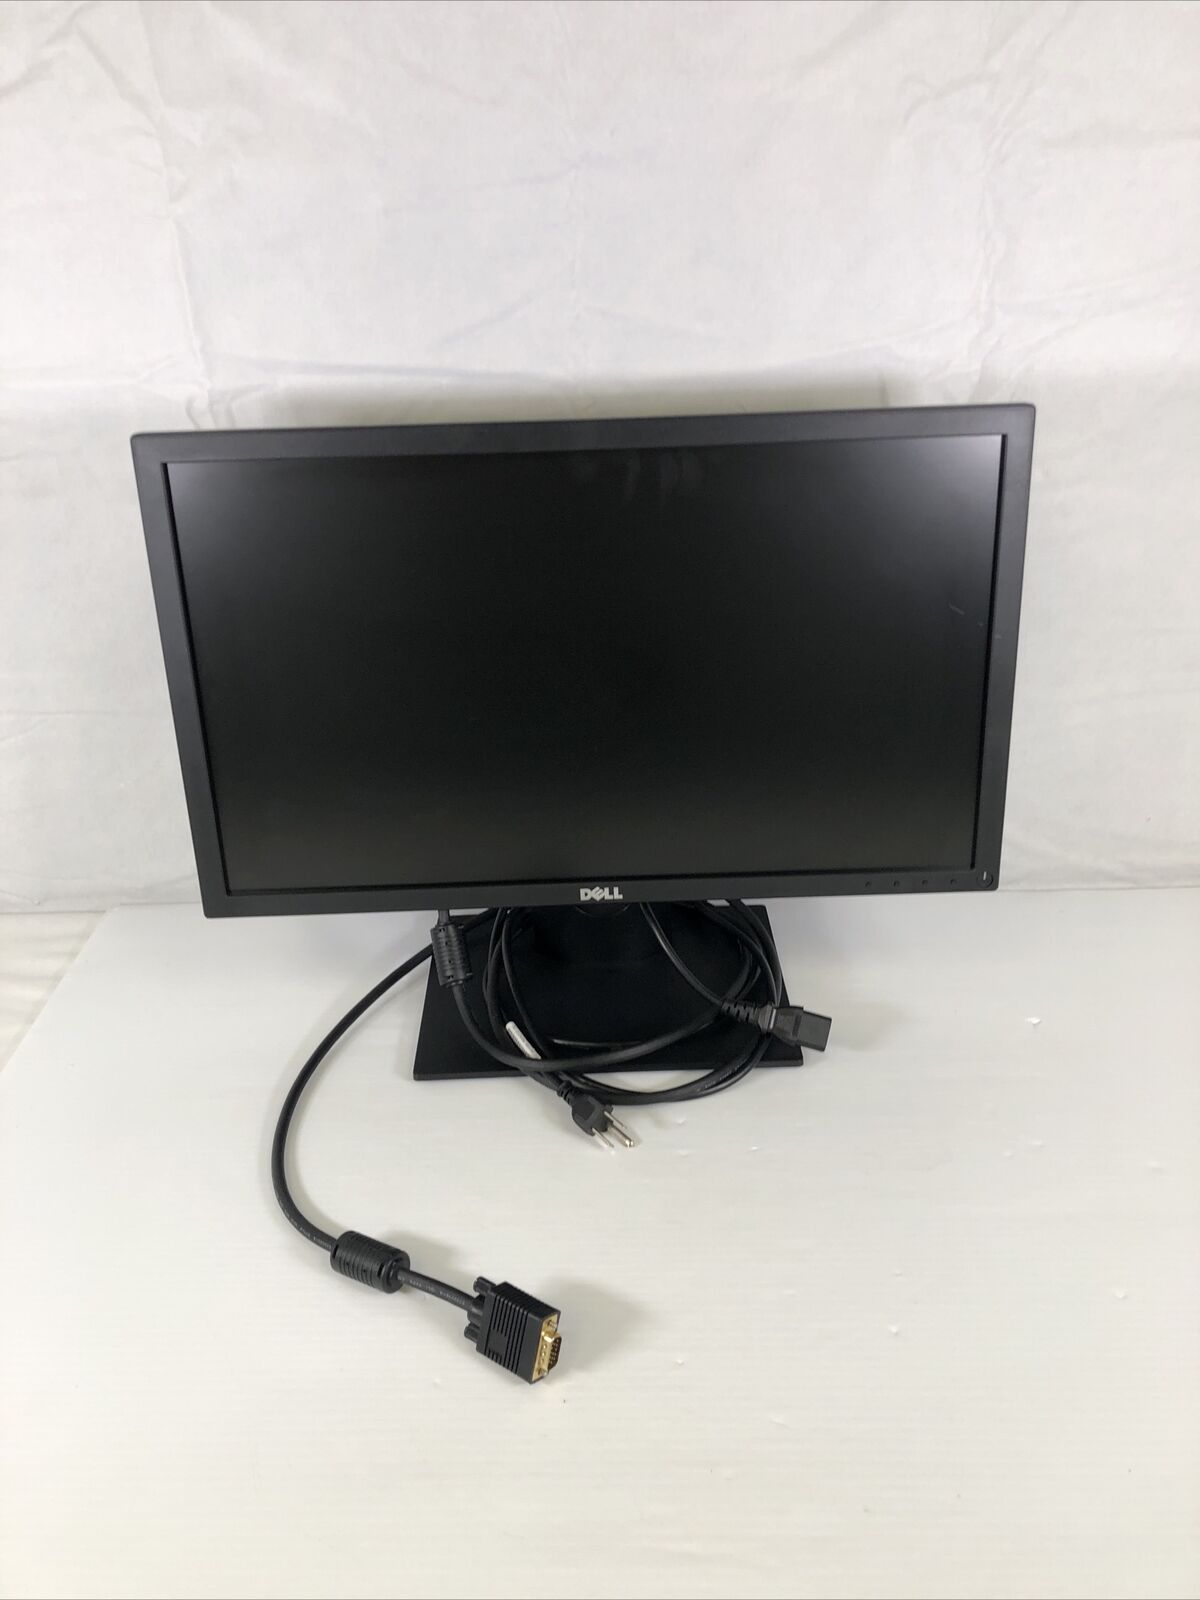 Dell E2216H 21.5 inch Widescreen LCD Monitor - 1920x1080 - with VGA and power